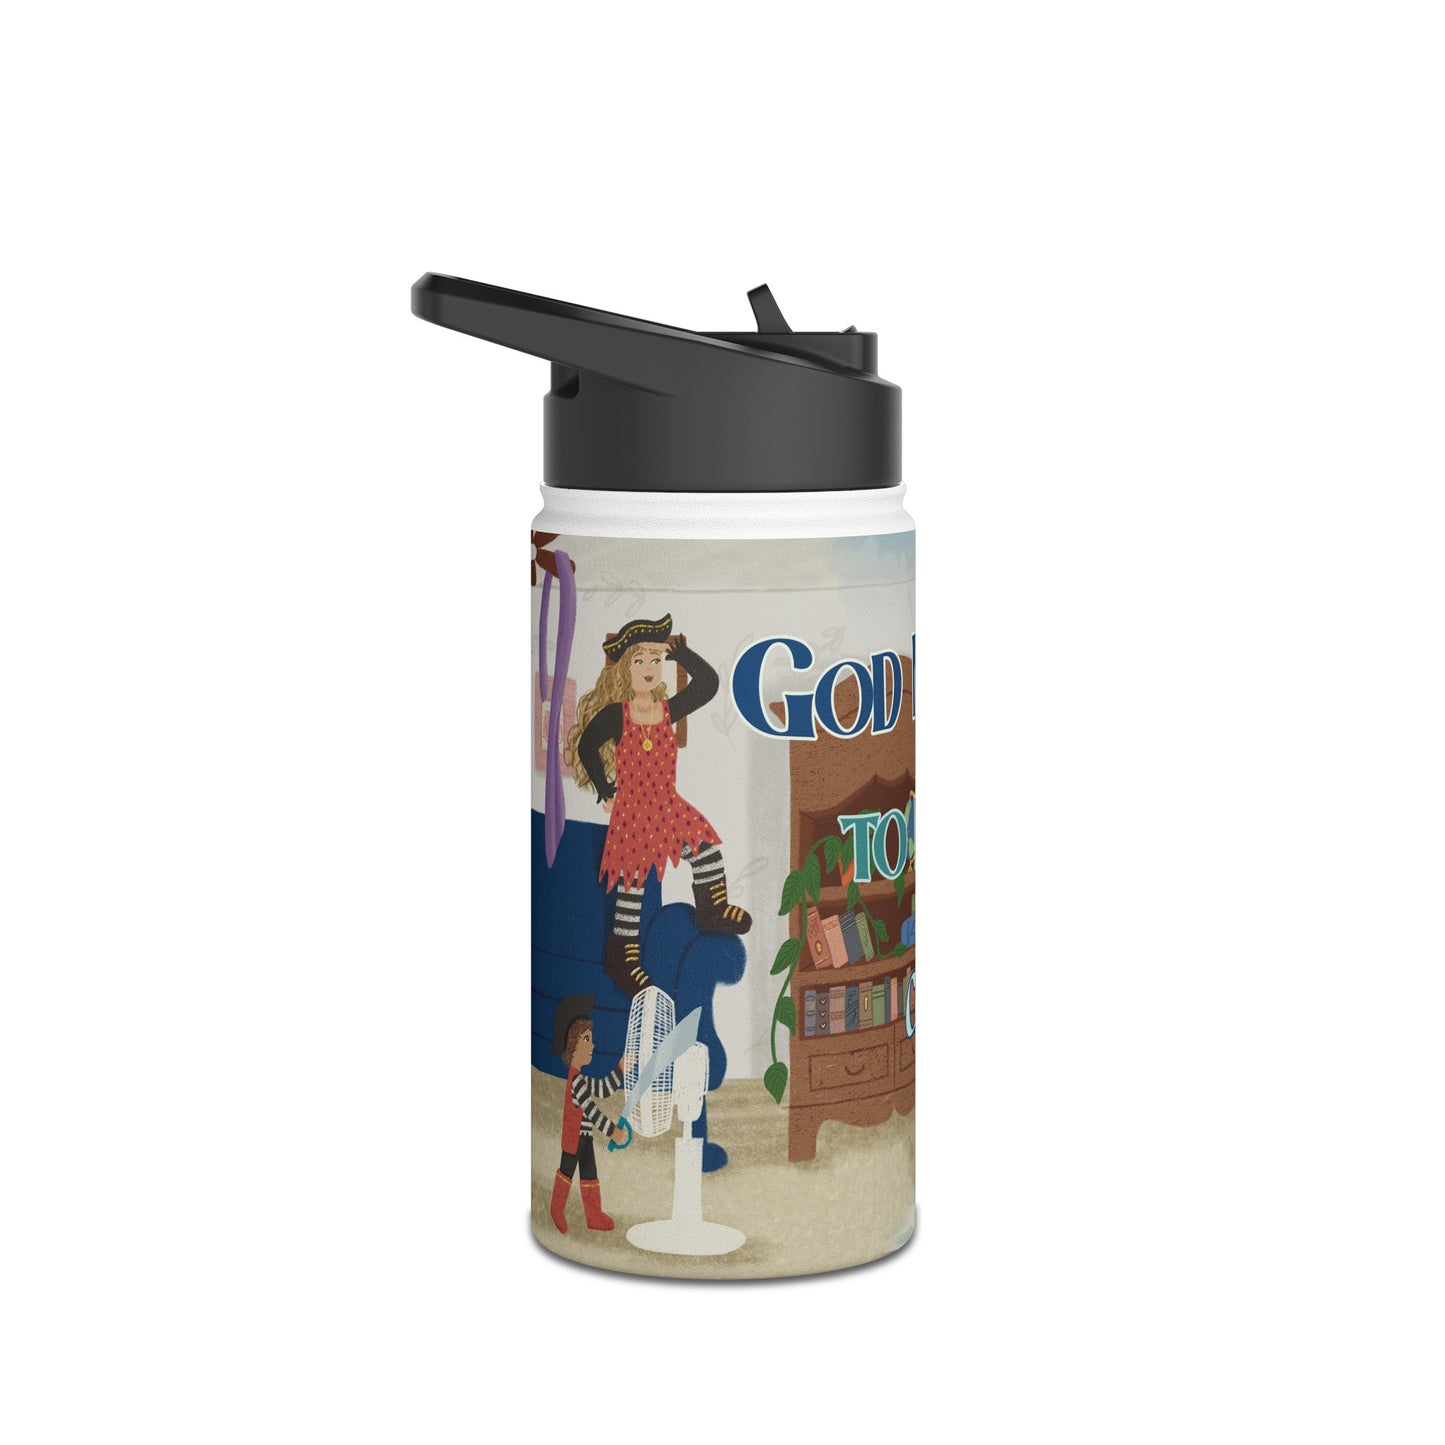 God Made Me to Be Brave - Stainless Steel Water Bottle, Standard Lid